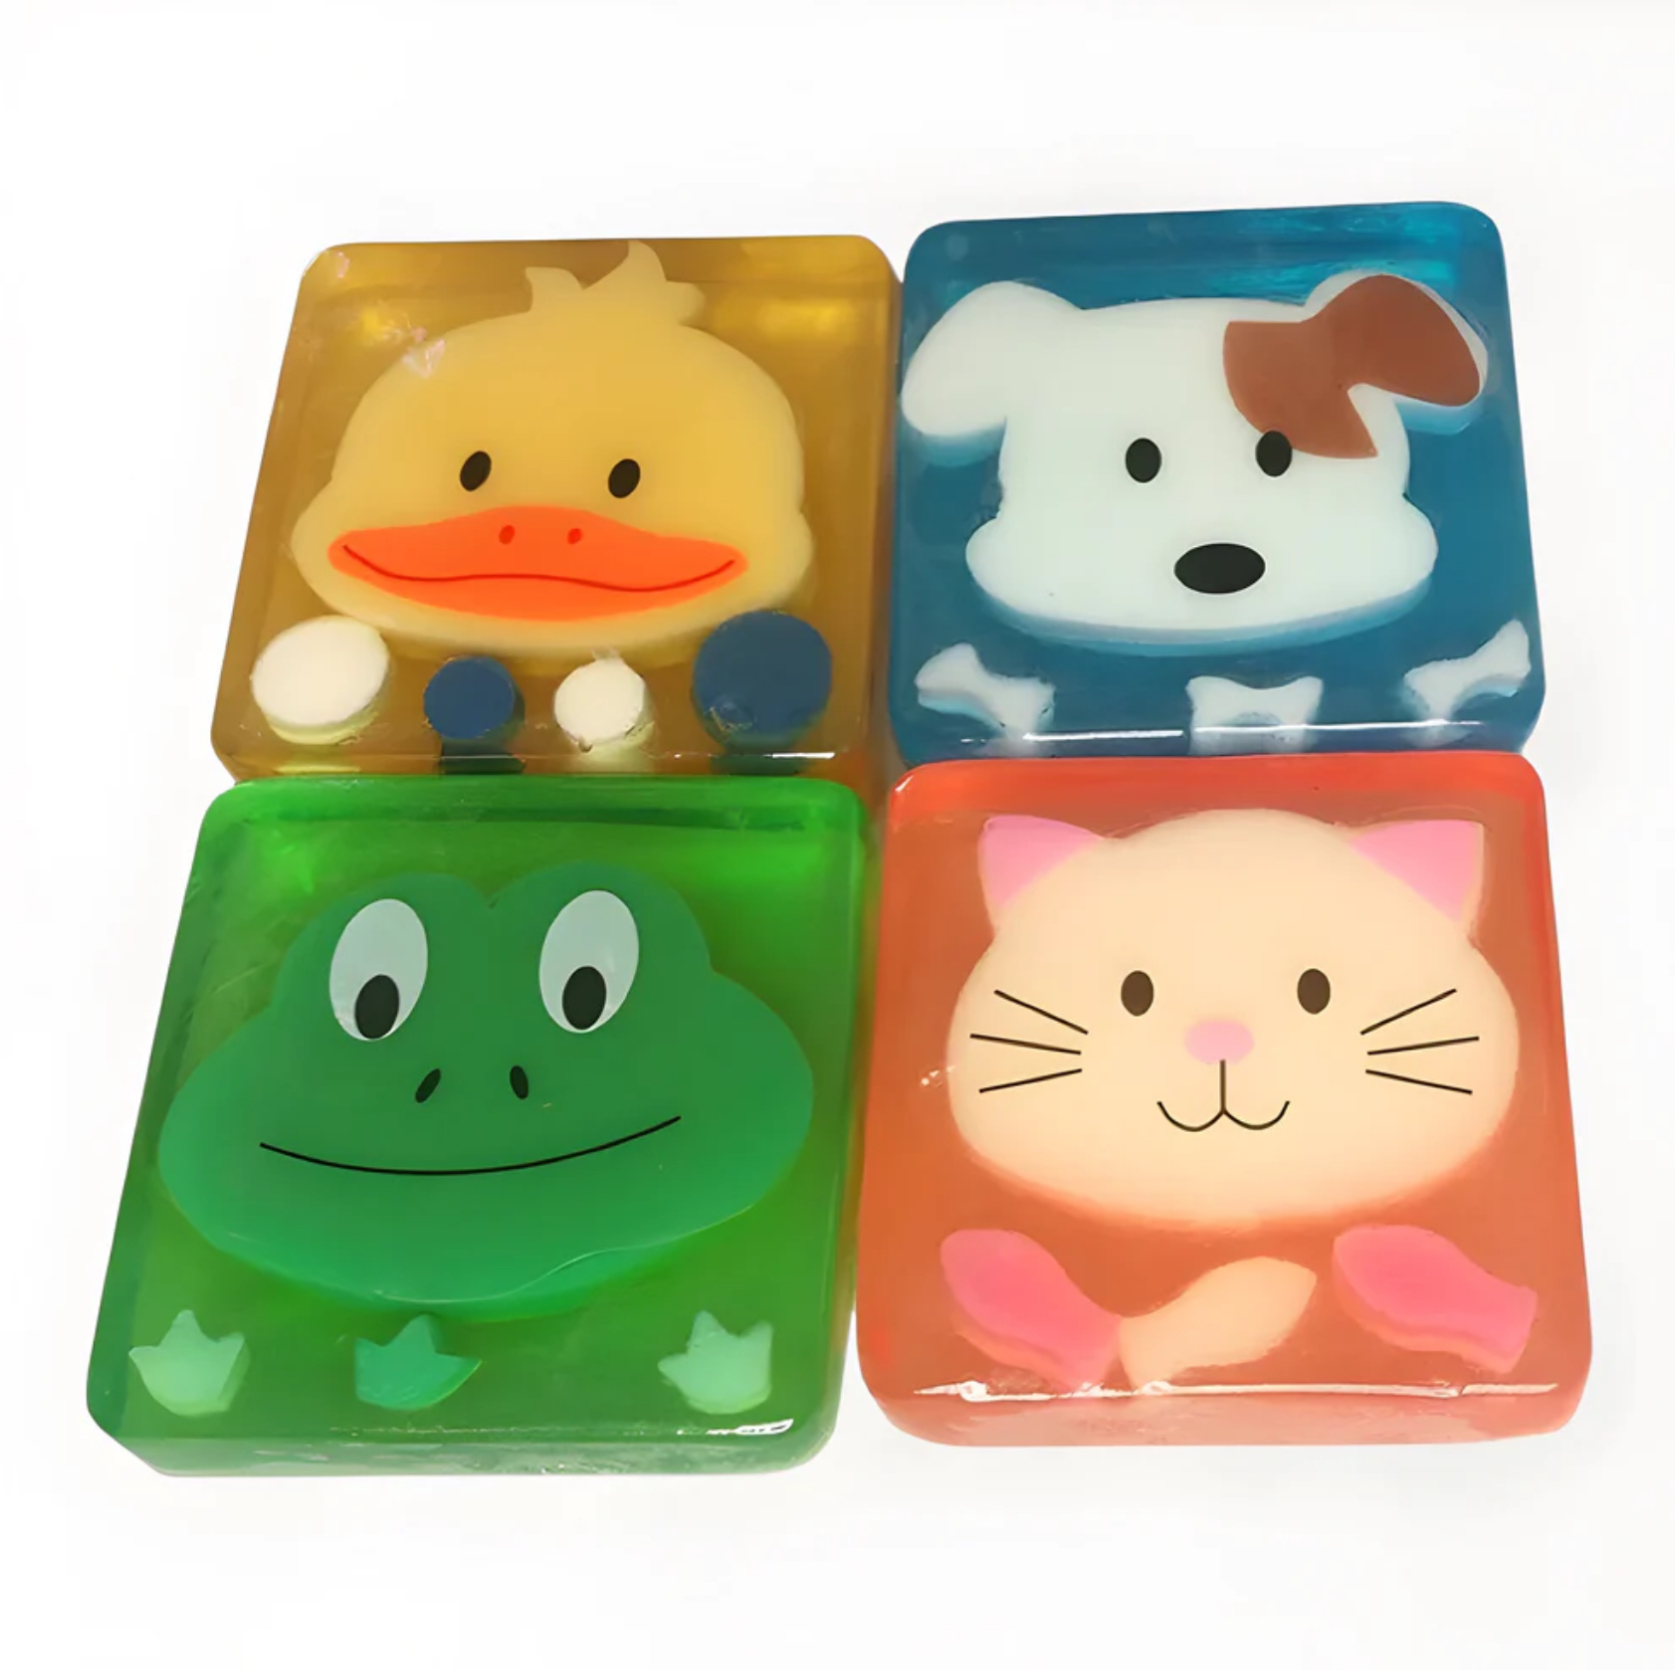 Handmade Cartoon Animal Soap  Children's Handcrafted for Bath Hand Washing Essential Oil Baby Kids Animals Shape Cleansing Soaps Bathroom toiletries Chick Duck Dog Frog Cat